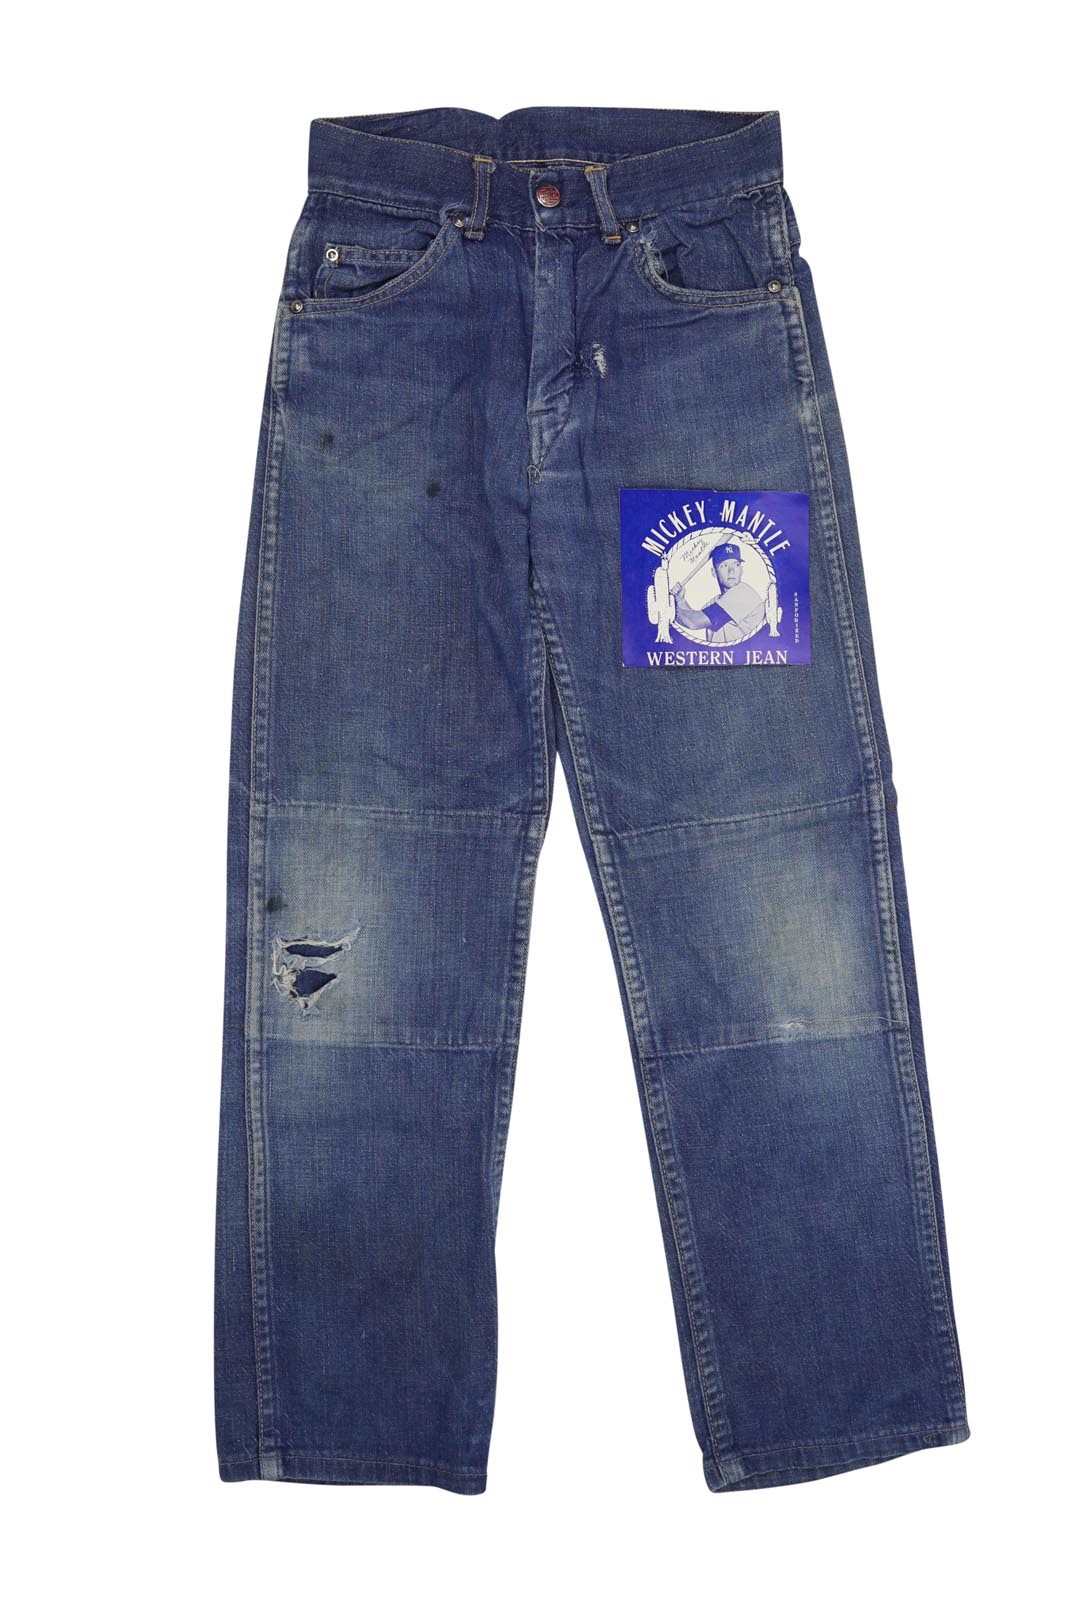 1960's Mickey Mantle Jeans